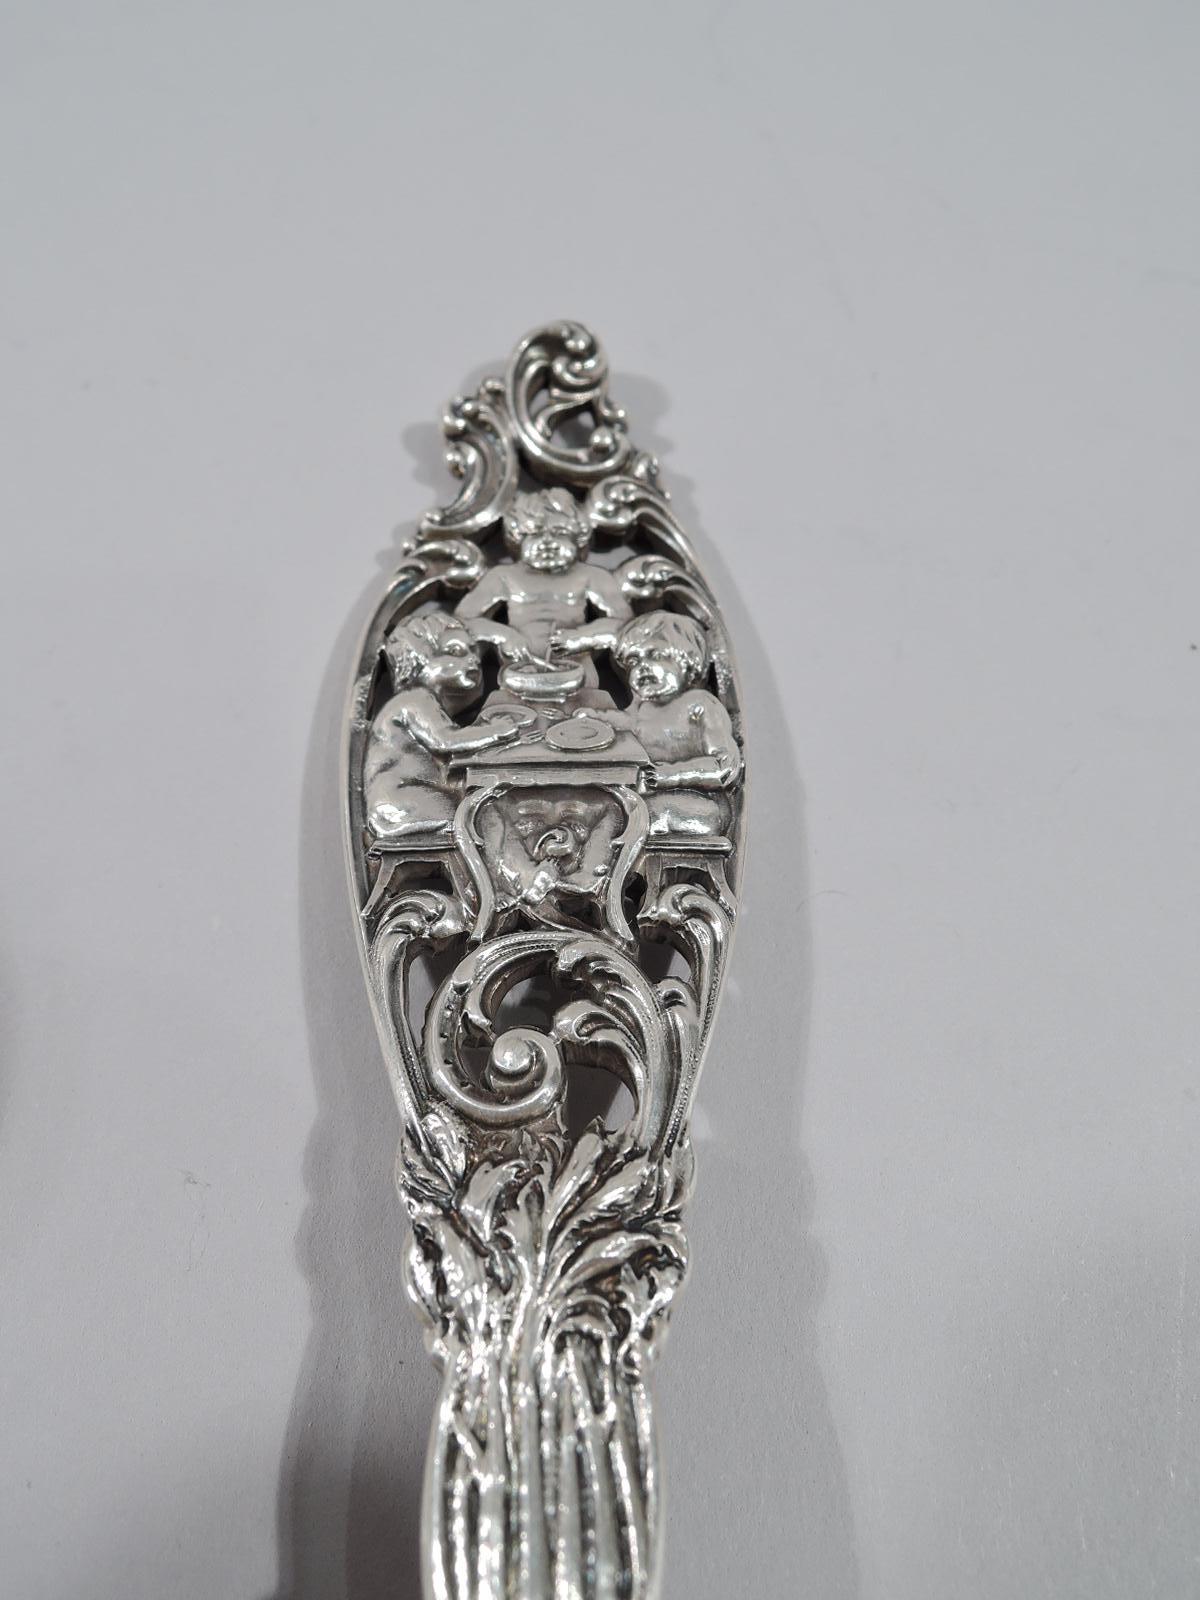 Rococo Revival Dominick & Haff Labors of Cupid Sterling Silver Salad Serving Pair